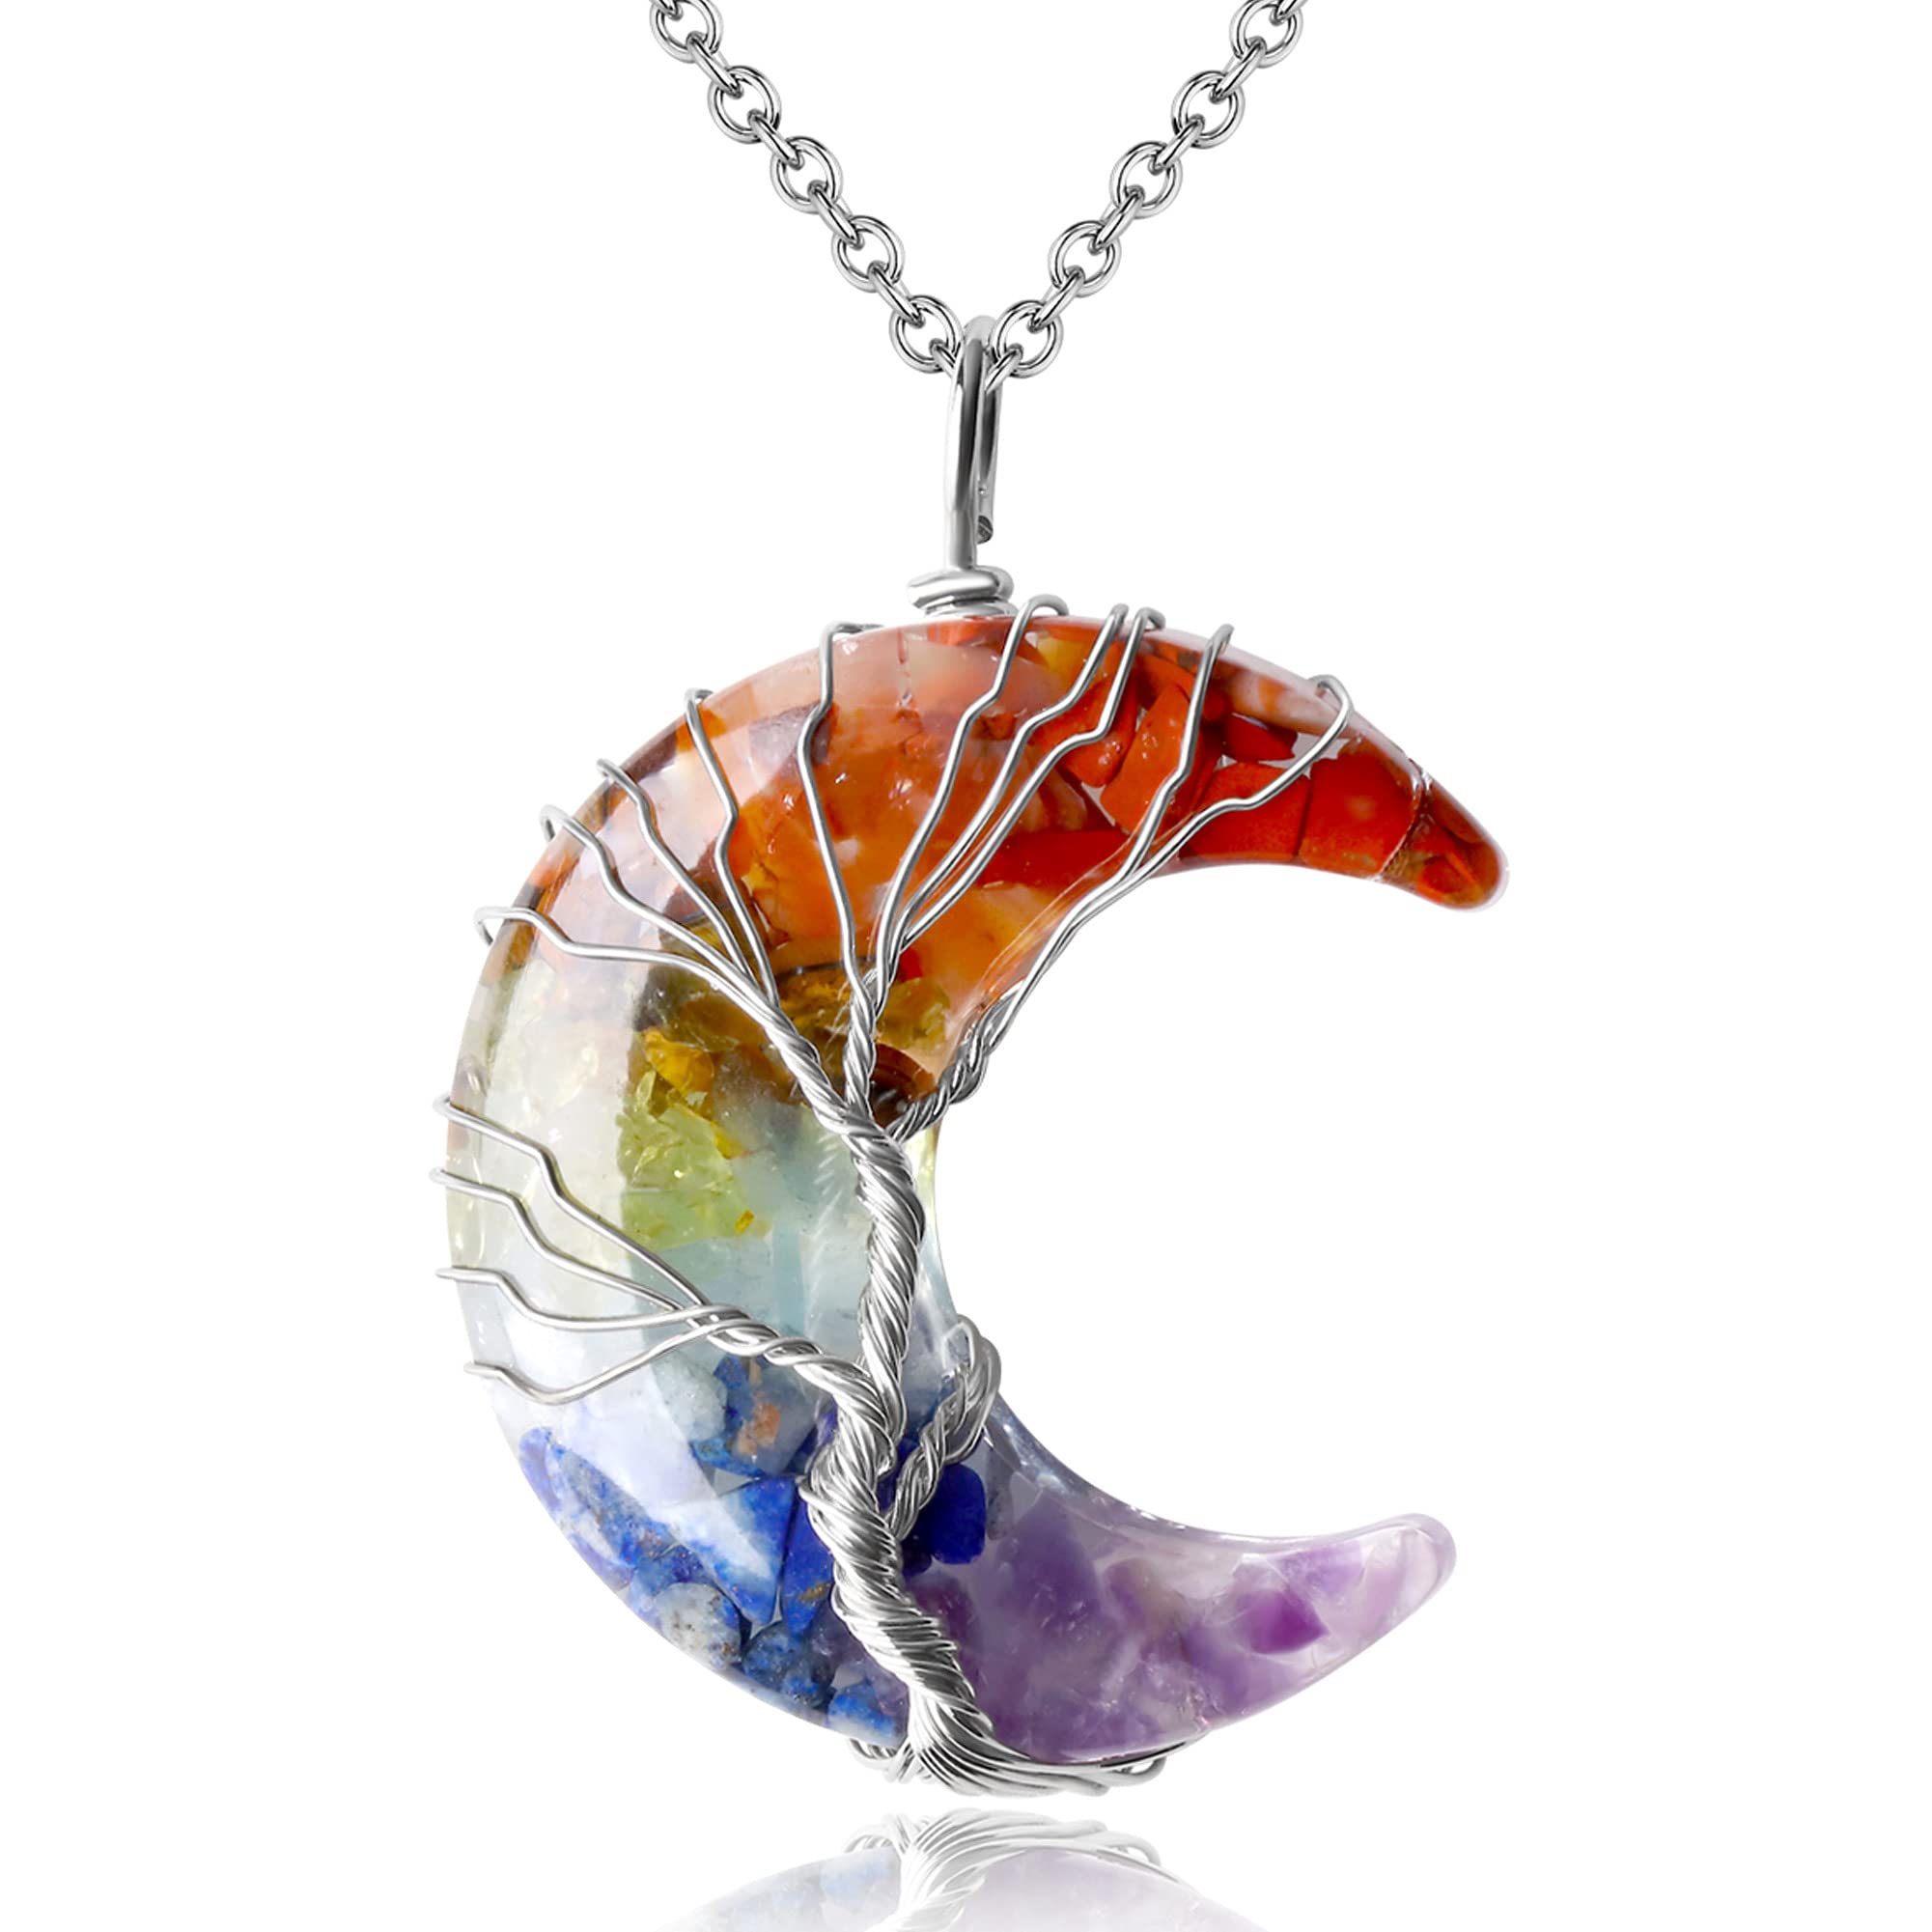 Healing Crystal Necklaces for Women and Men - Energy Muse